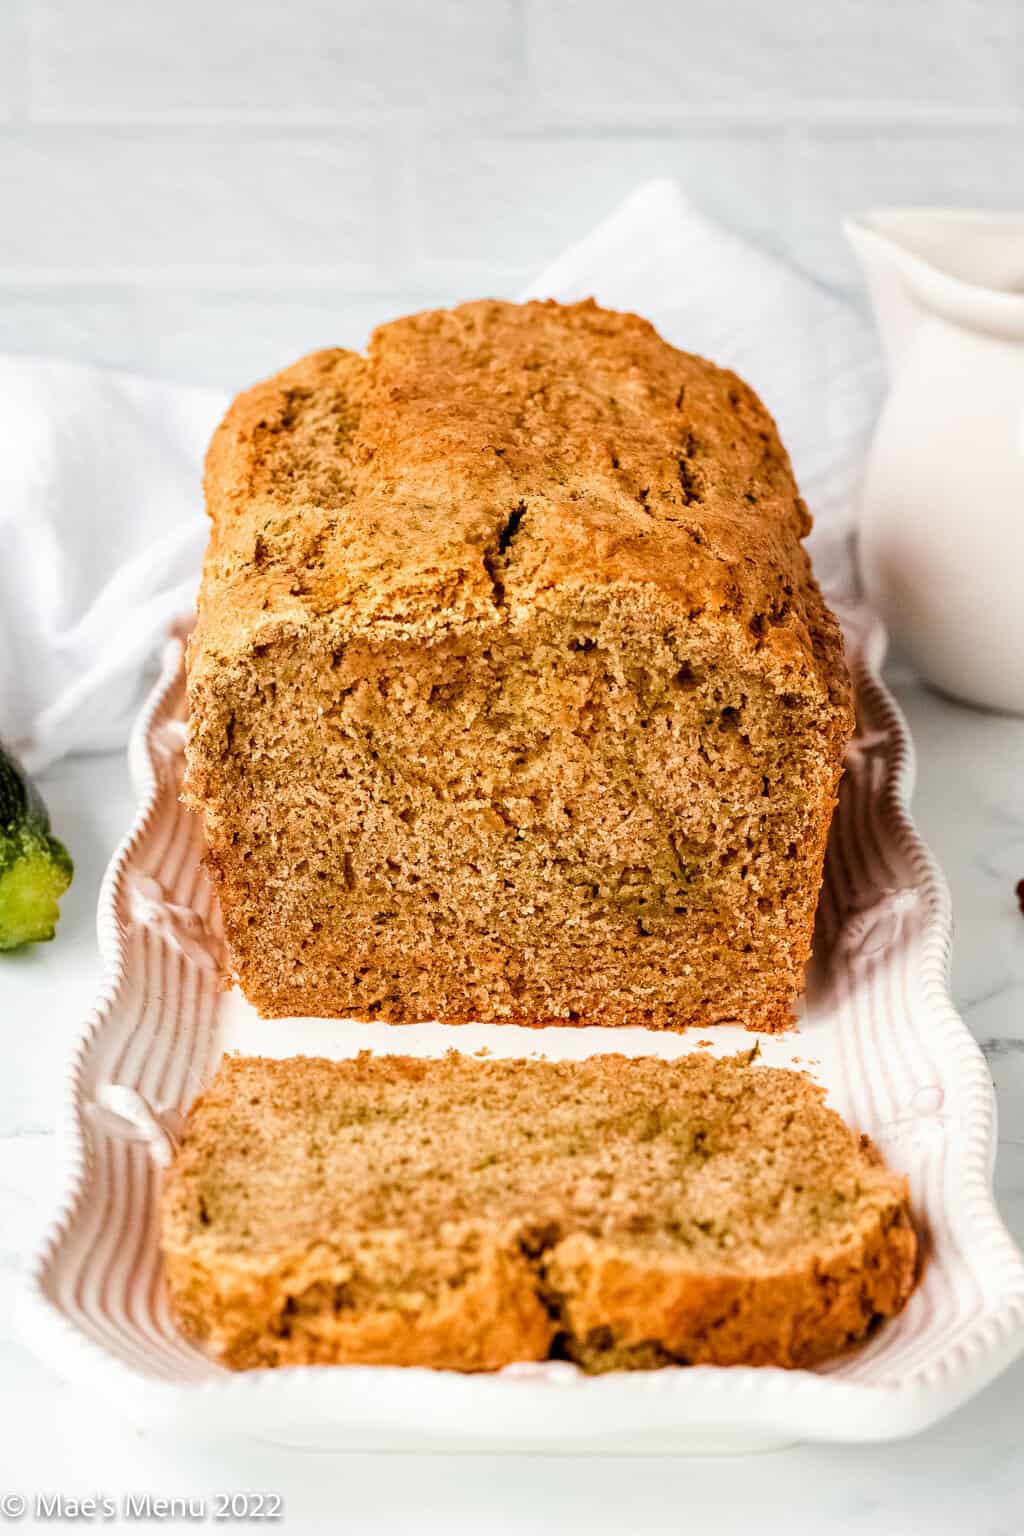 A plate of a slice and loaf of gluten-free zucchini bread